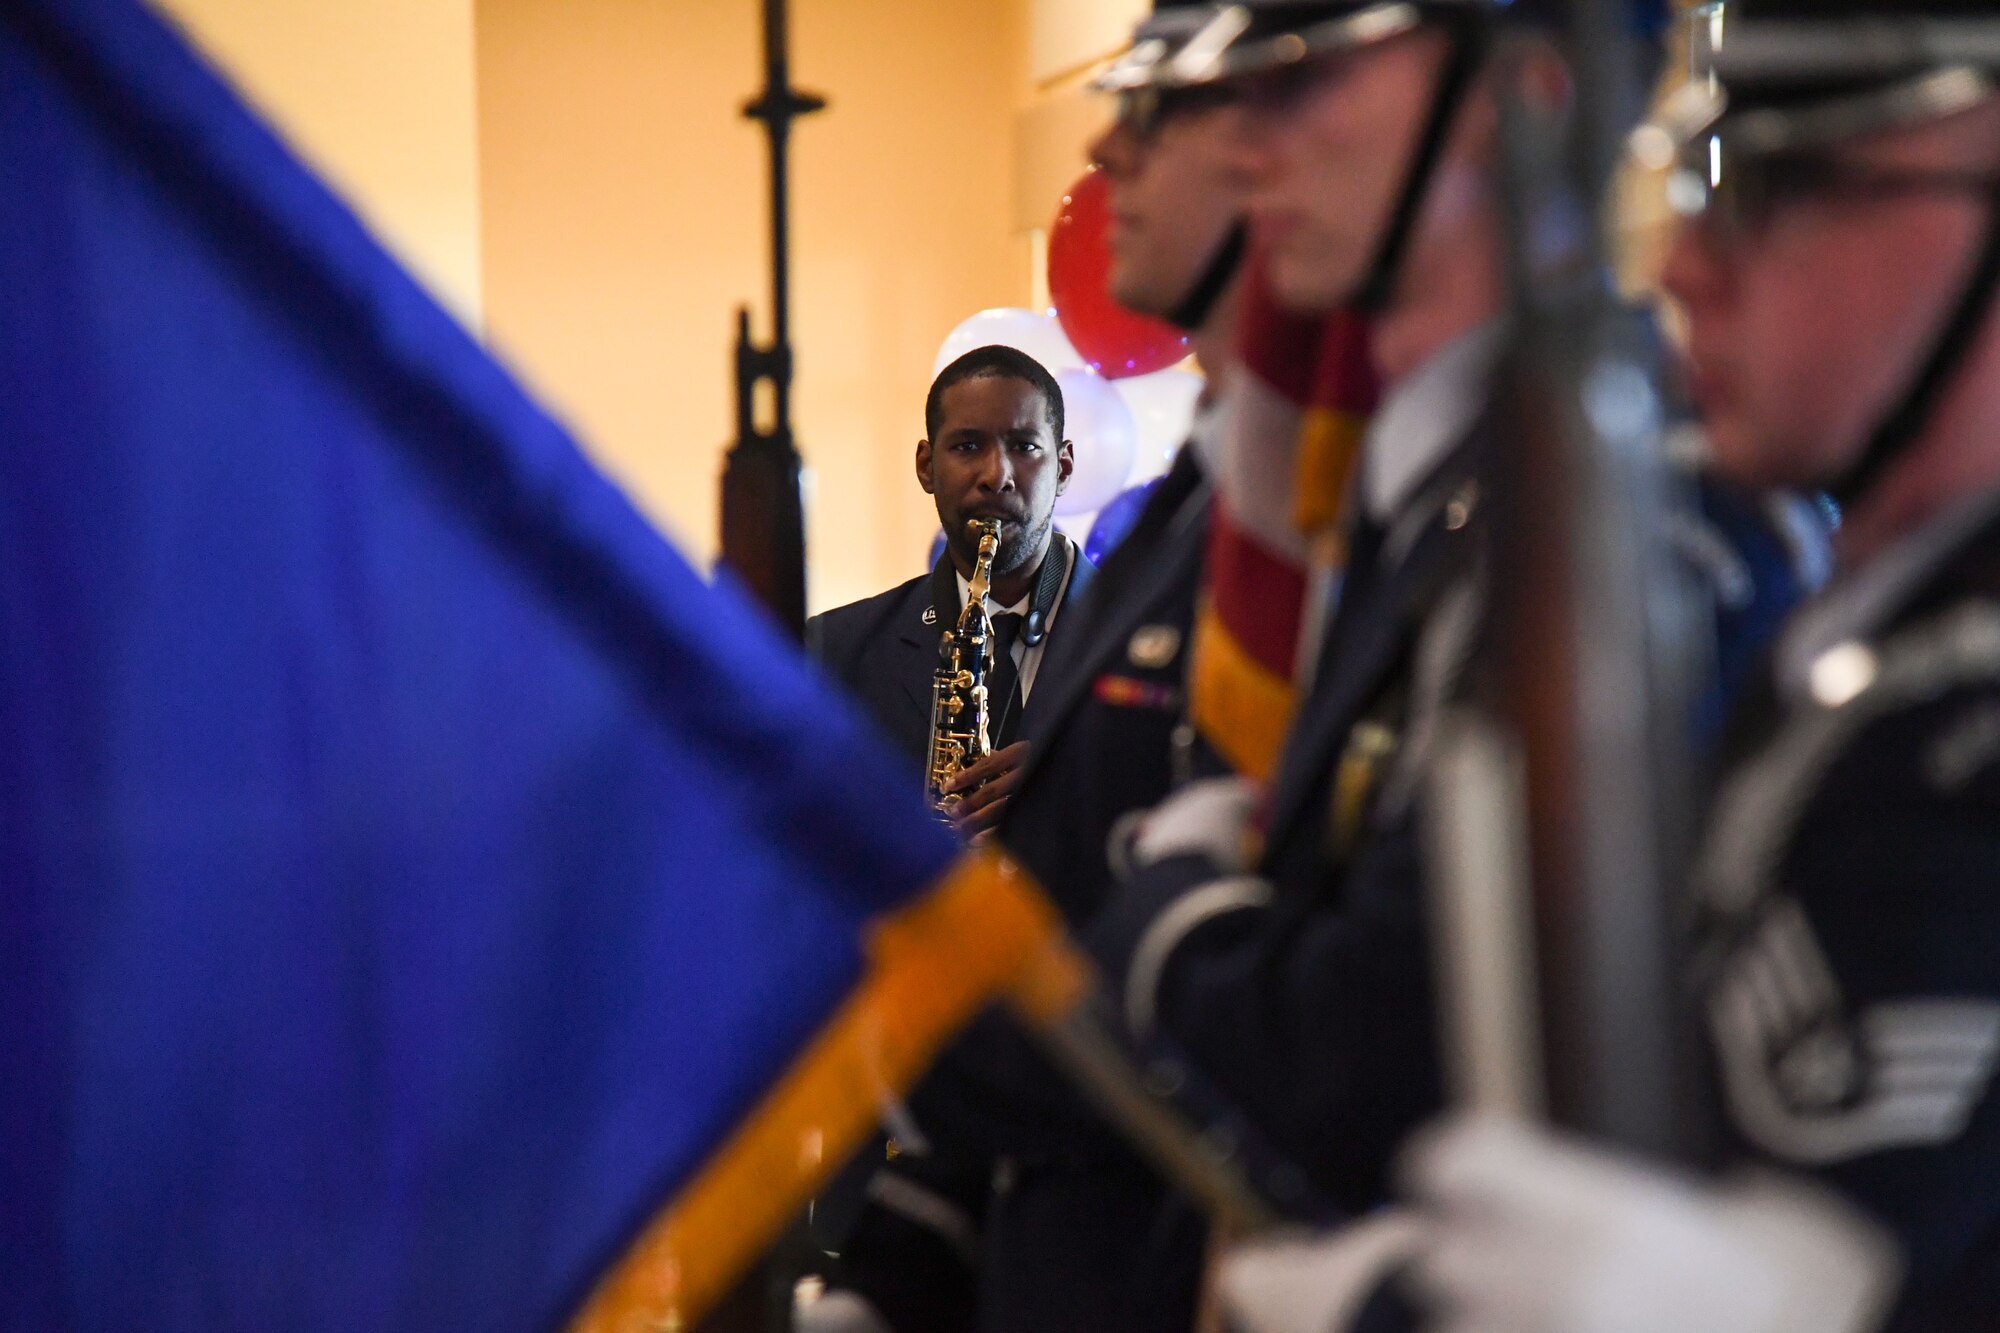 U.S. Air Force Staff Sgt. Bobby Lucas, III, 338th Training Squadron military training leader, plays the national anthem during the Chief Master Sergeant Recognition Ceremony inside the Bay Breeze Event Center at Keesler Air Force Base, Mississippi, April 20, 2023.